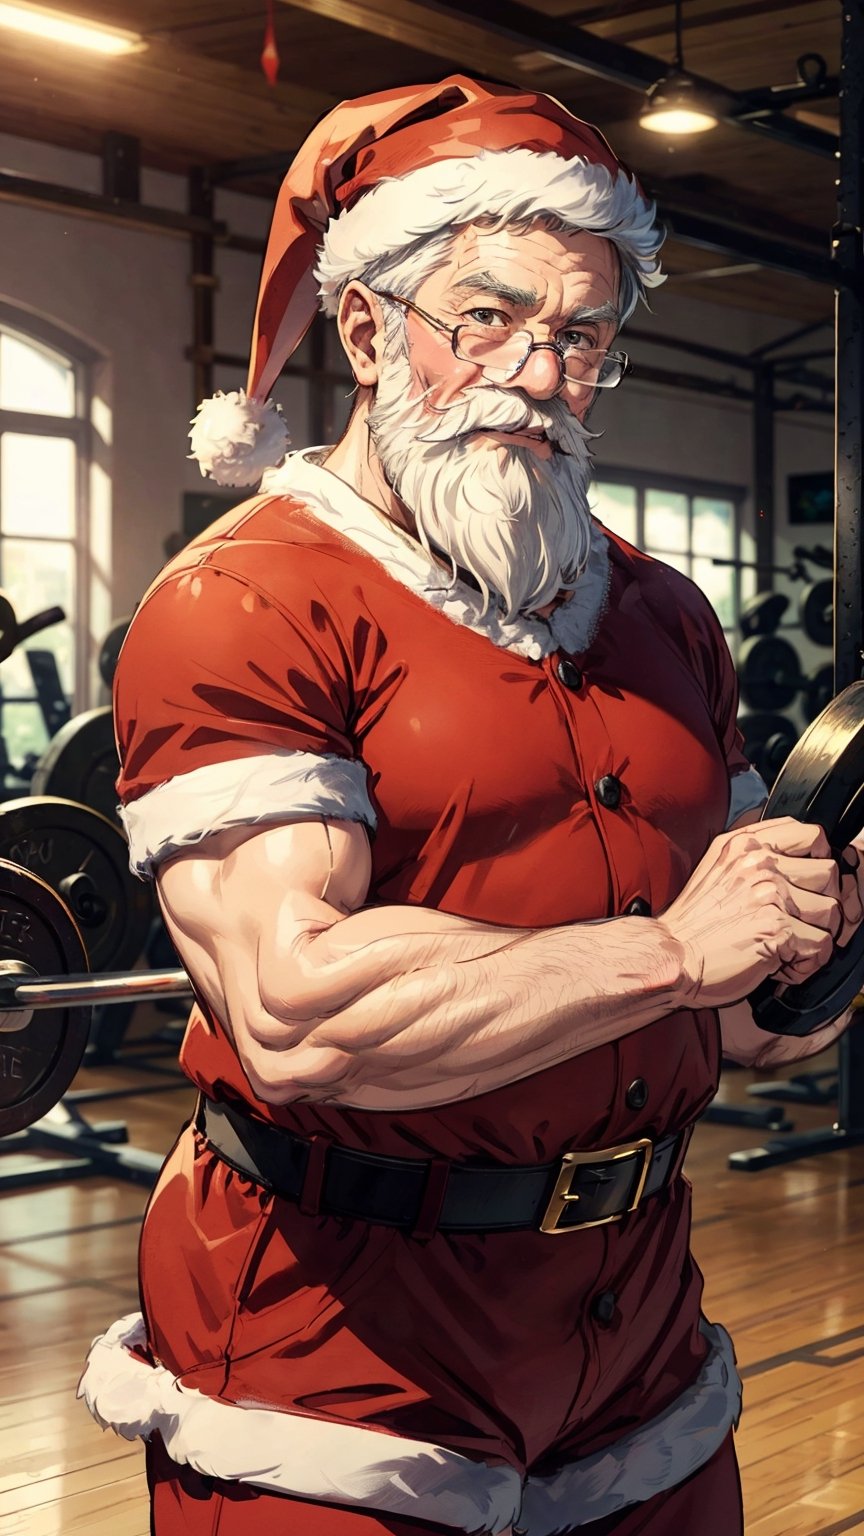 a ((santa clause) holding a barbell in a gym hall) in this christmas photo, weightlifting, old, old man exercise, solo, gym, beard, hat, dumbbell, santa hat, ((santa costume))